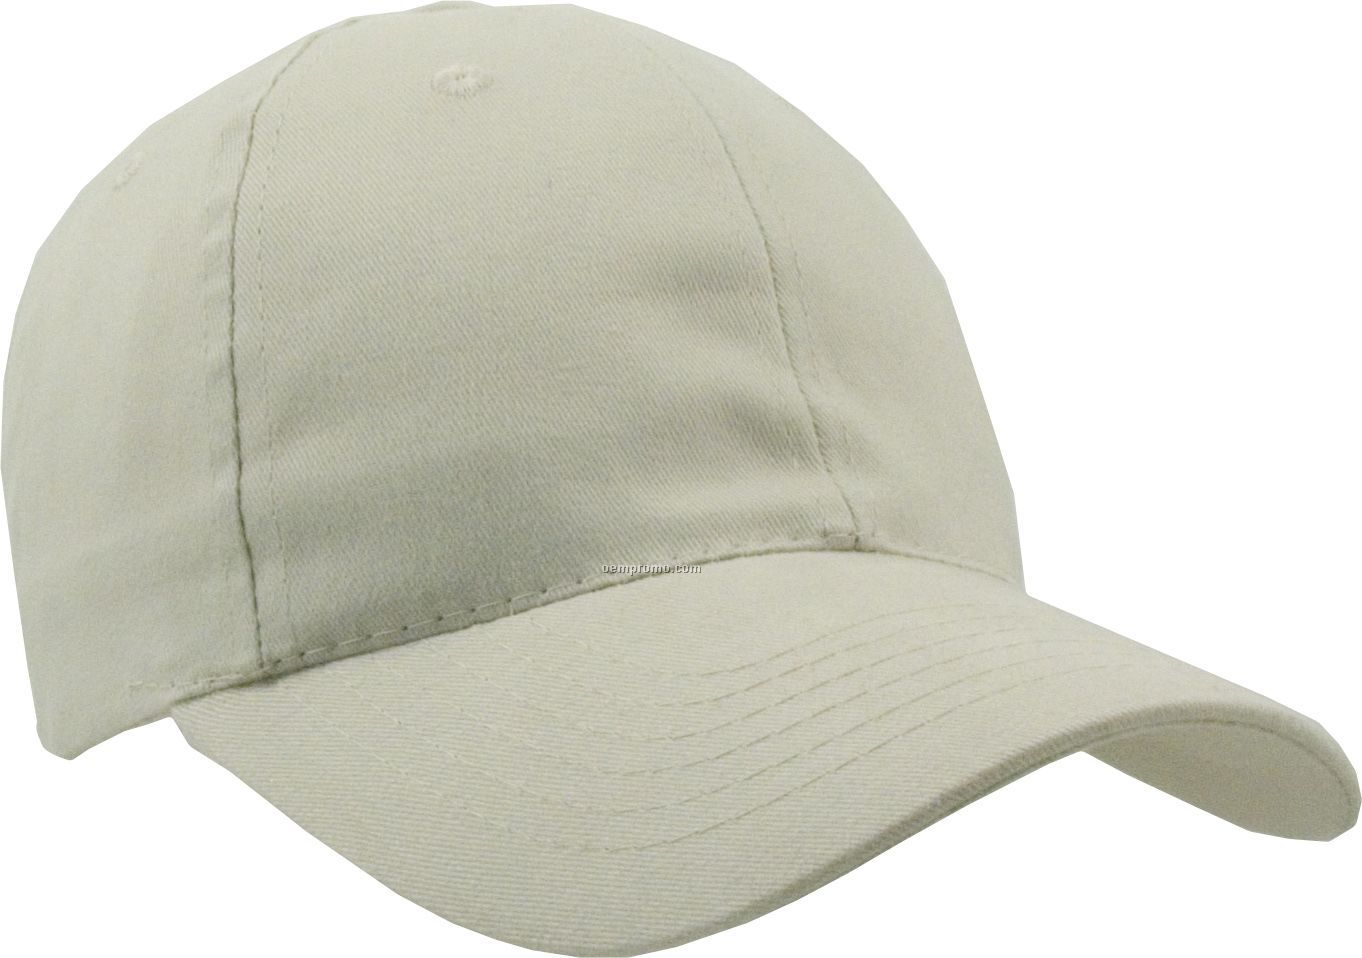 Brushed Cotton Twill Cap W/ Velcro Closure (Overseas 6-7 Week Delivery)